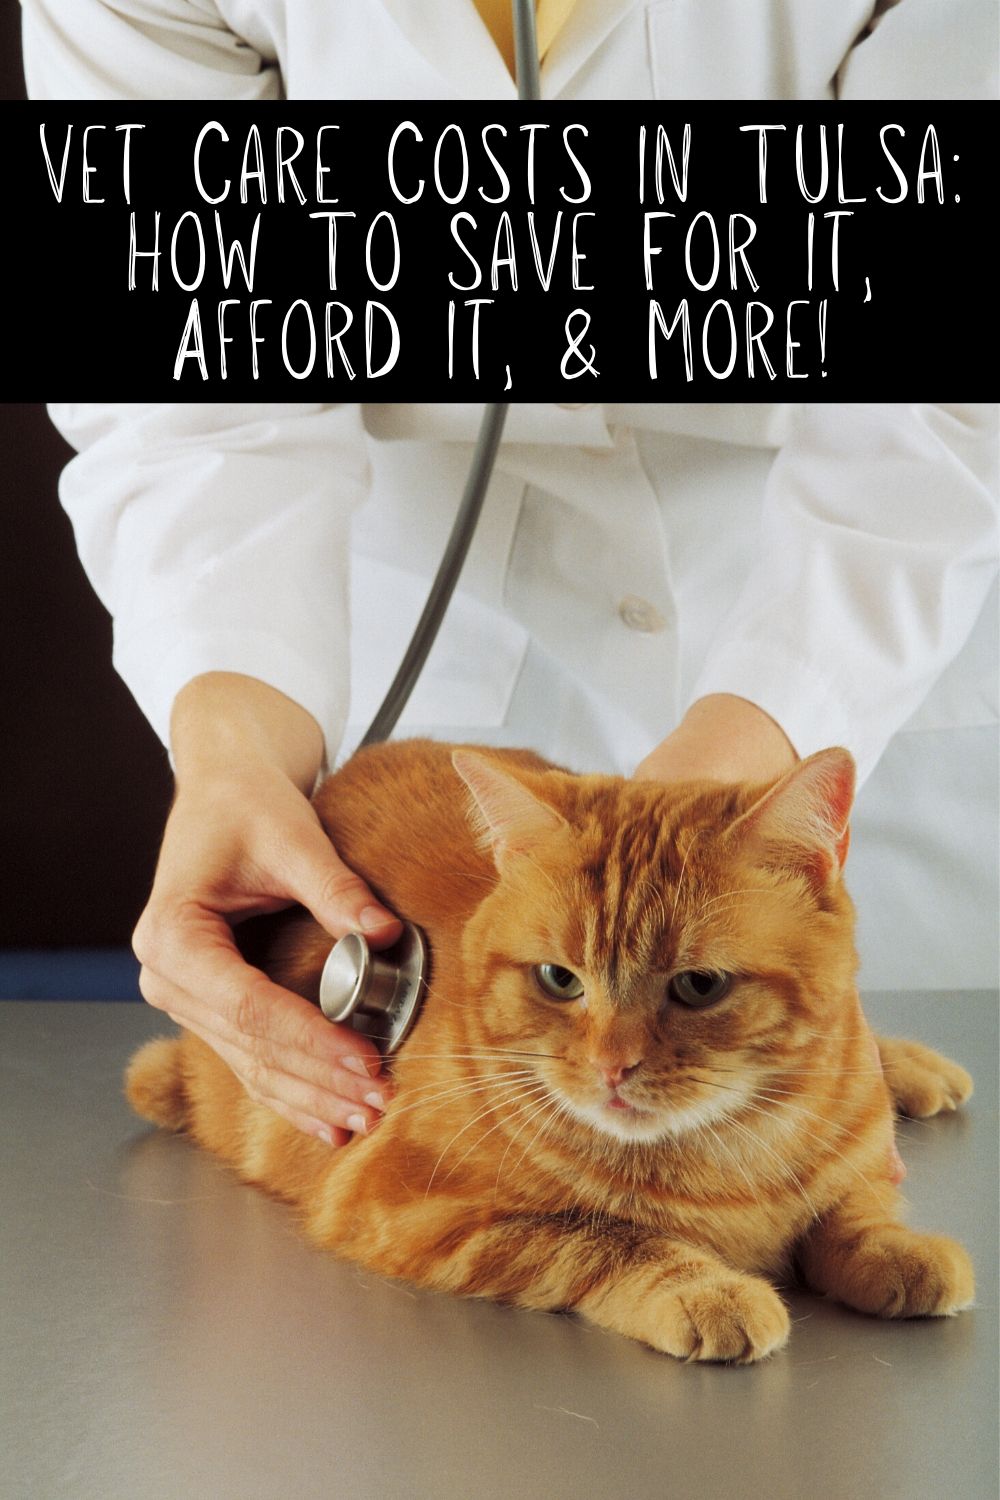 Vet care costs in Tulsa, like everywhere else, can sneak up on you. Be prepared for the best pet care possible with these tips and tricks.